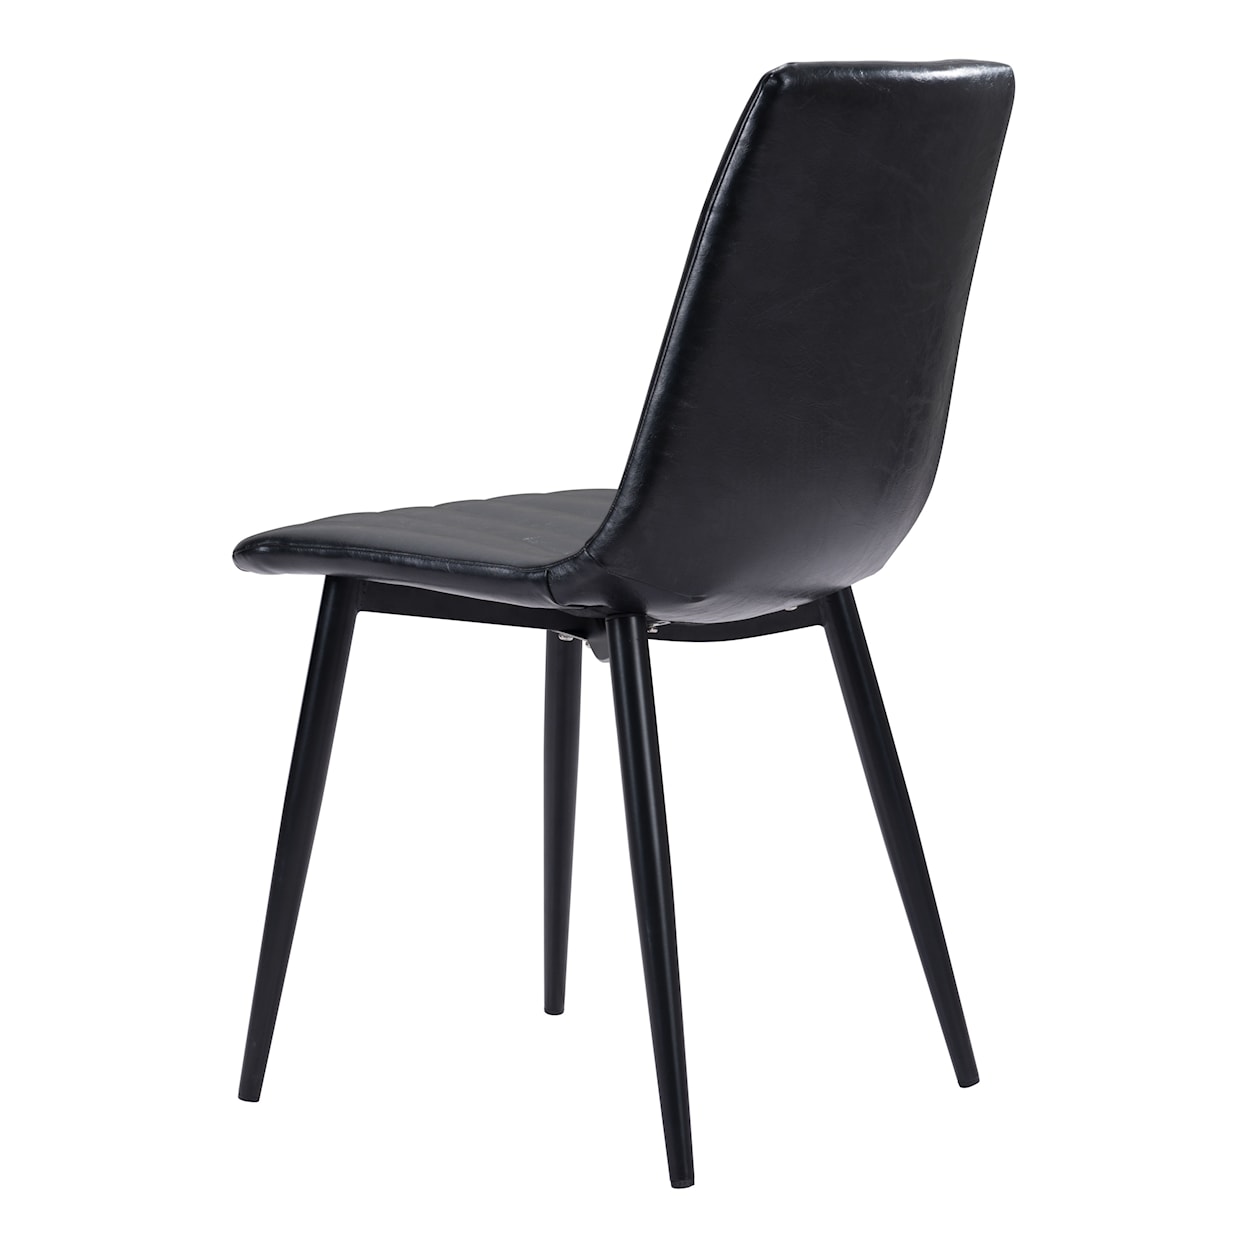 Zuo Dolce Dining Chair Set